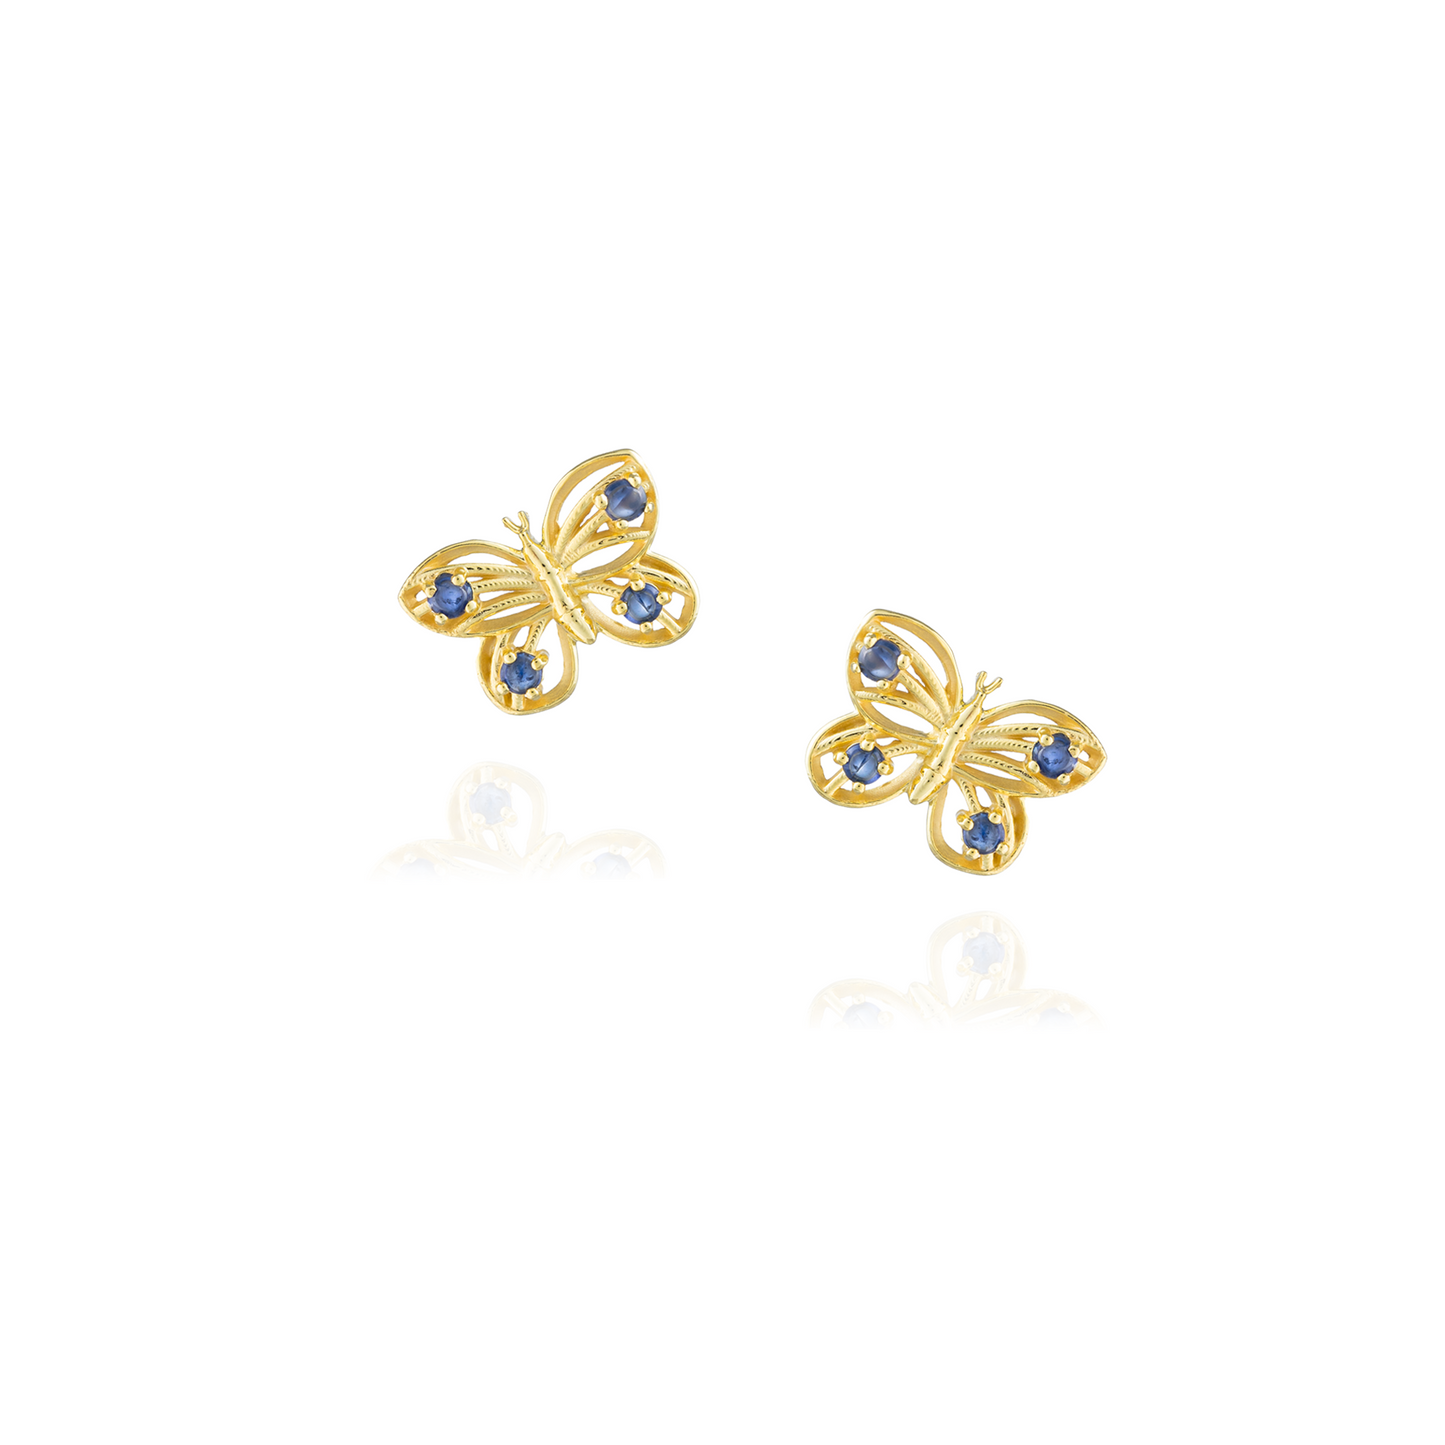 925 Silver Gold Plated 18KT Earrings with Blue Sapphire